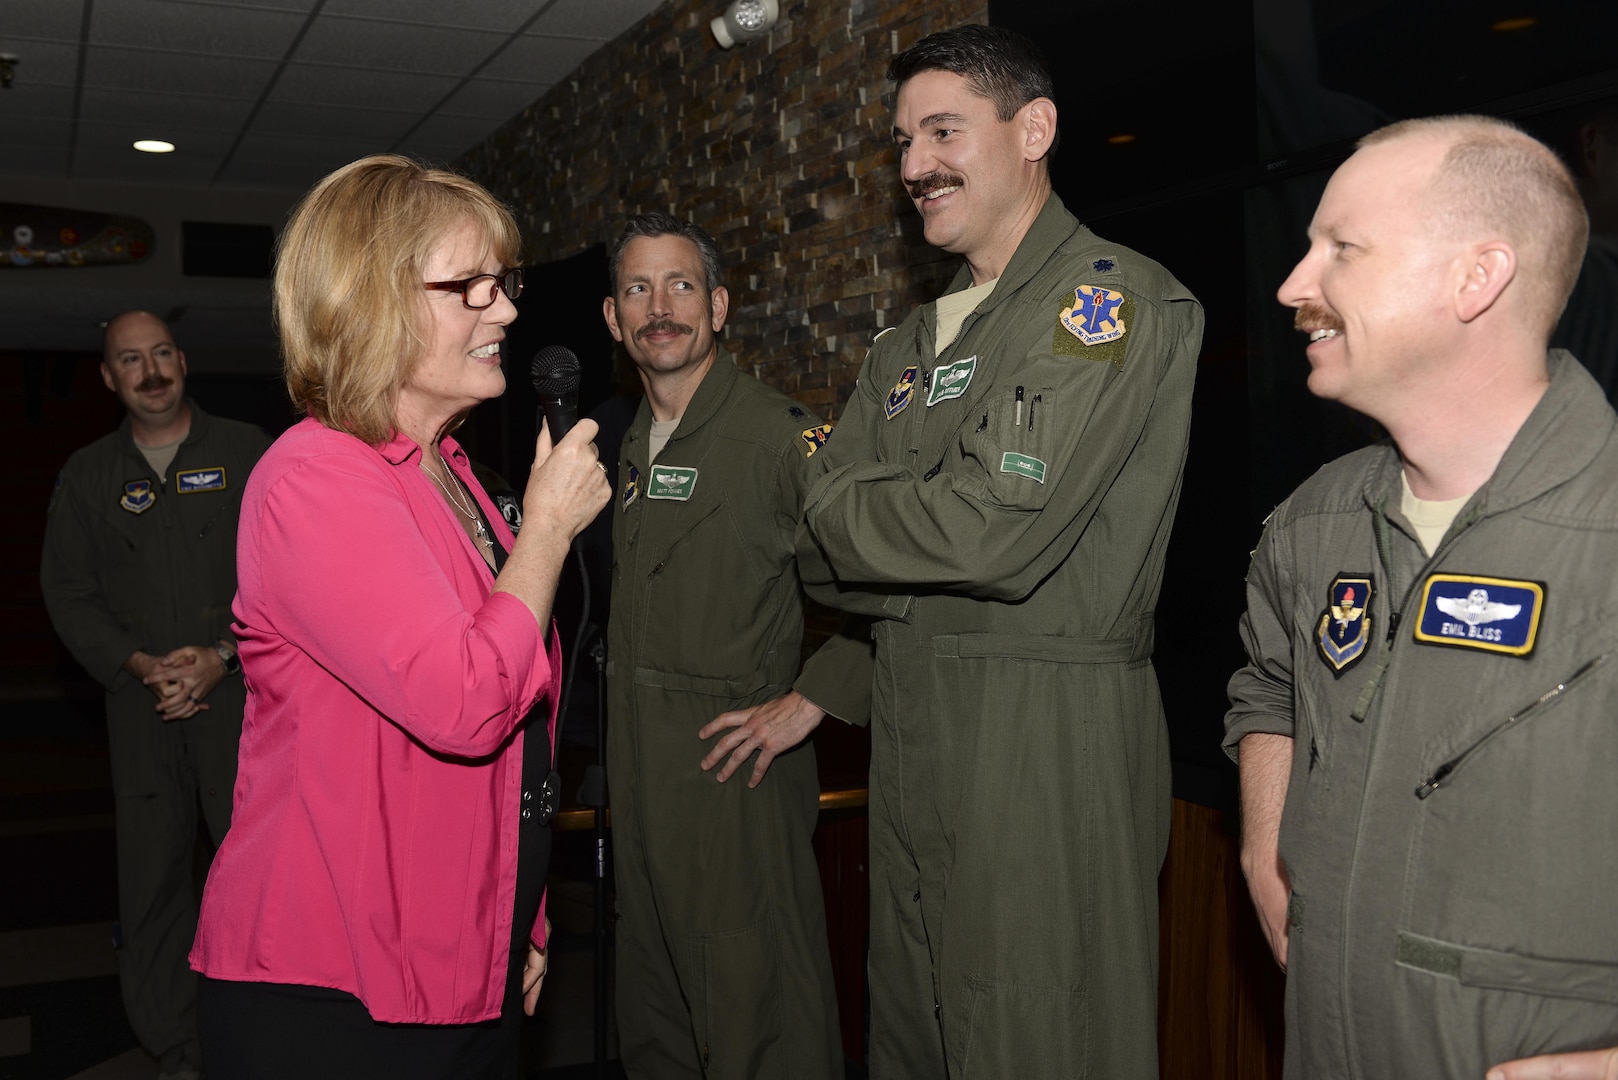 Christina Olds, daughter of retired Brig. Gen. Robin Olds, examines mustaches to determine the one that best conveys her father’s legendary spirit at the Auger Inn on Joint Base San Antonio-Randolph, Texas, March 30, 2017. Olds visit was part of the activities for the 44th Freedom Fighters Reunion honoring POW/MIA pilots. (U.S. Air Force photo by Staff Sgt. Michelle Patten)